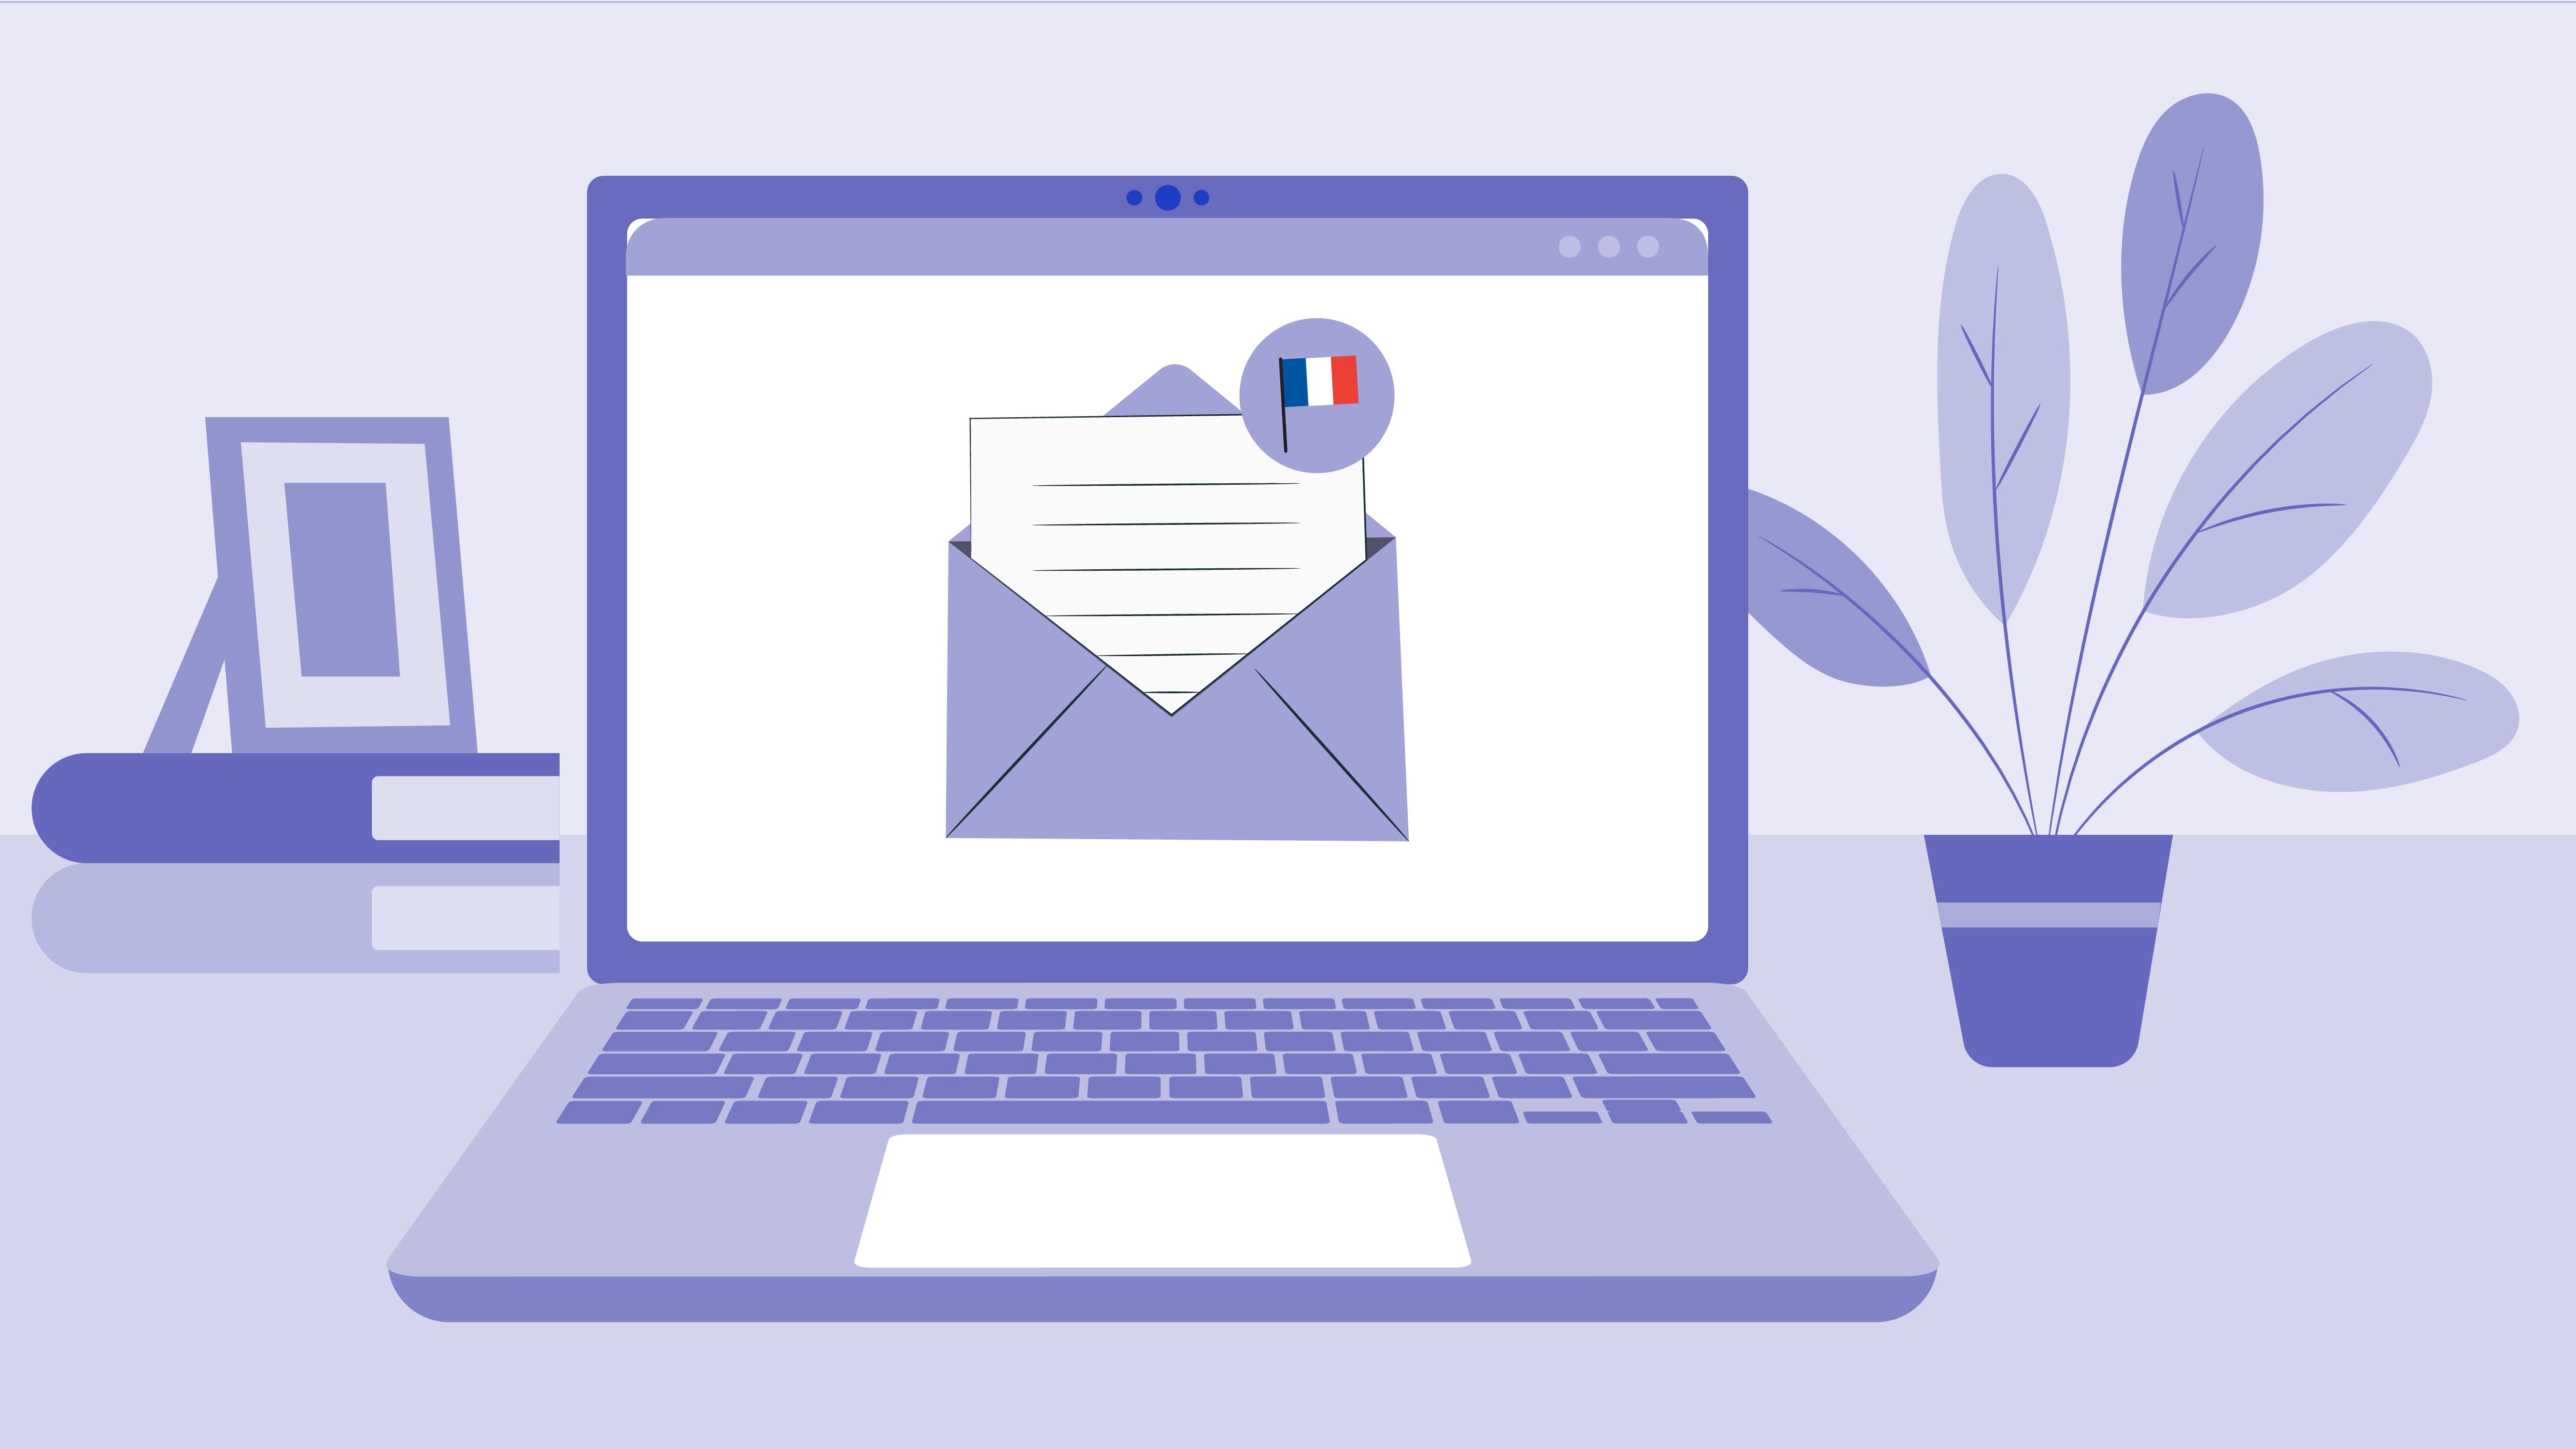 Iggy sees +1 in her inbox — it’s a new email from a French course (can be marked with a French flag instead of a sender’s address).